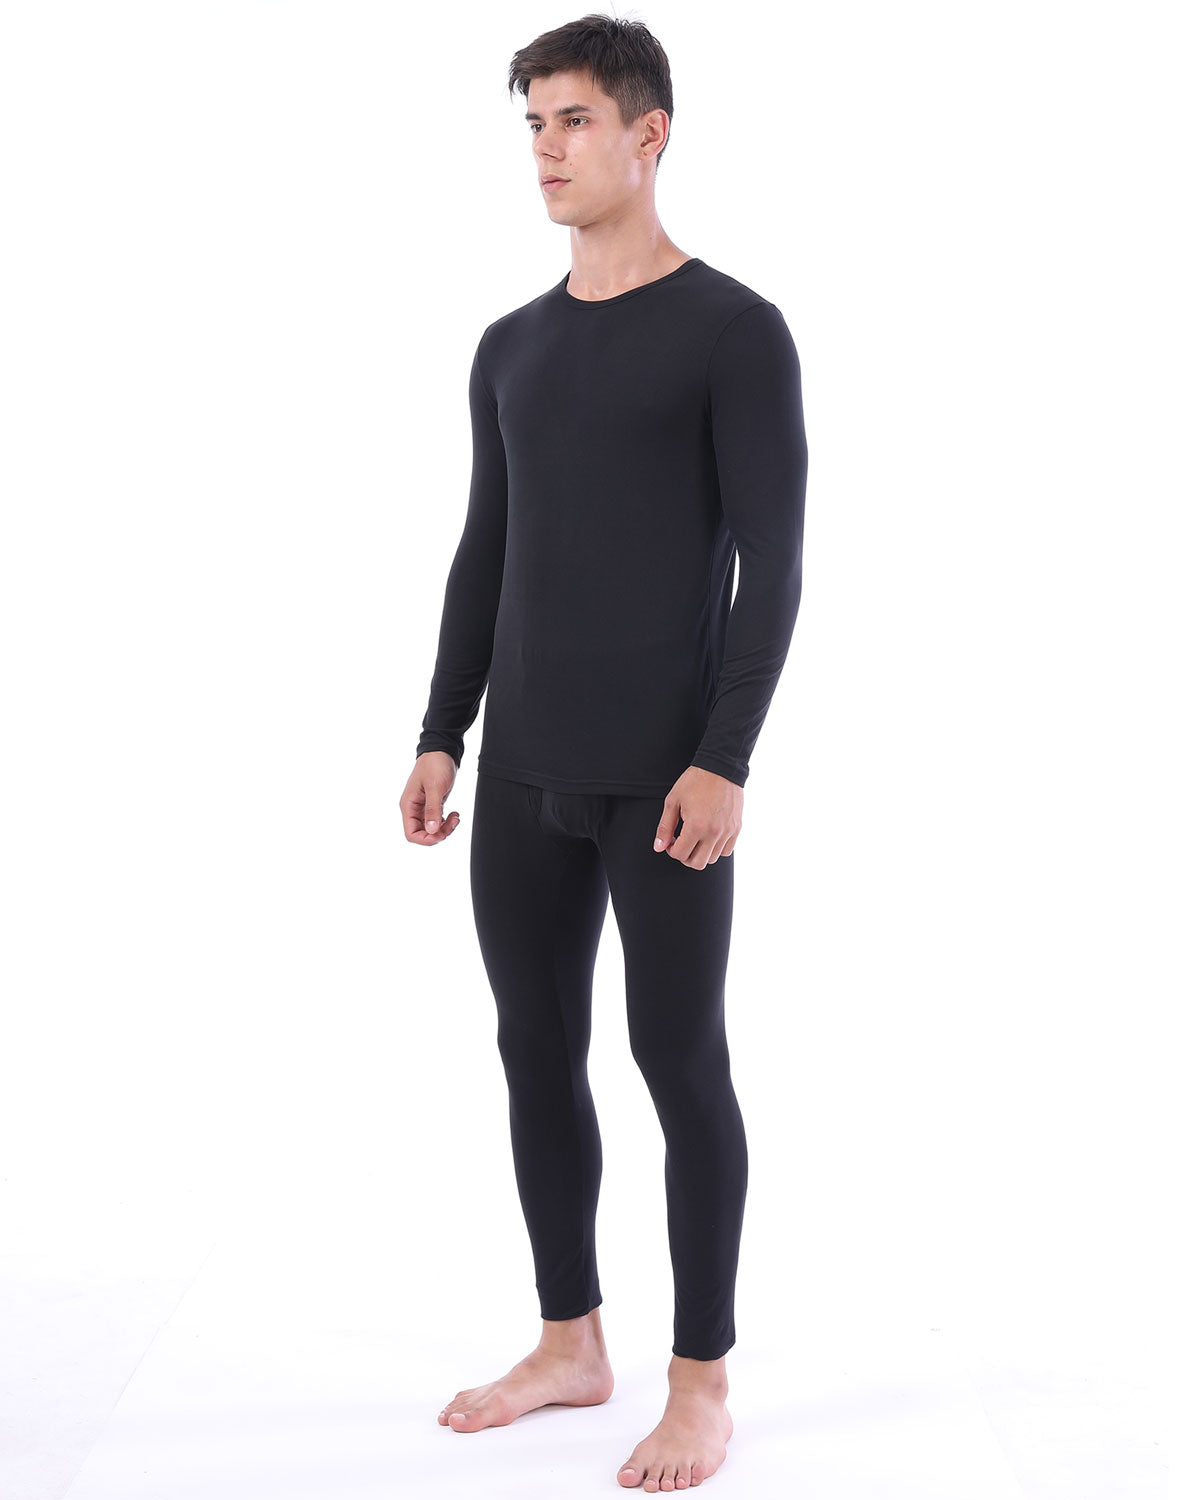 Long Johns for Skiing